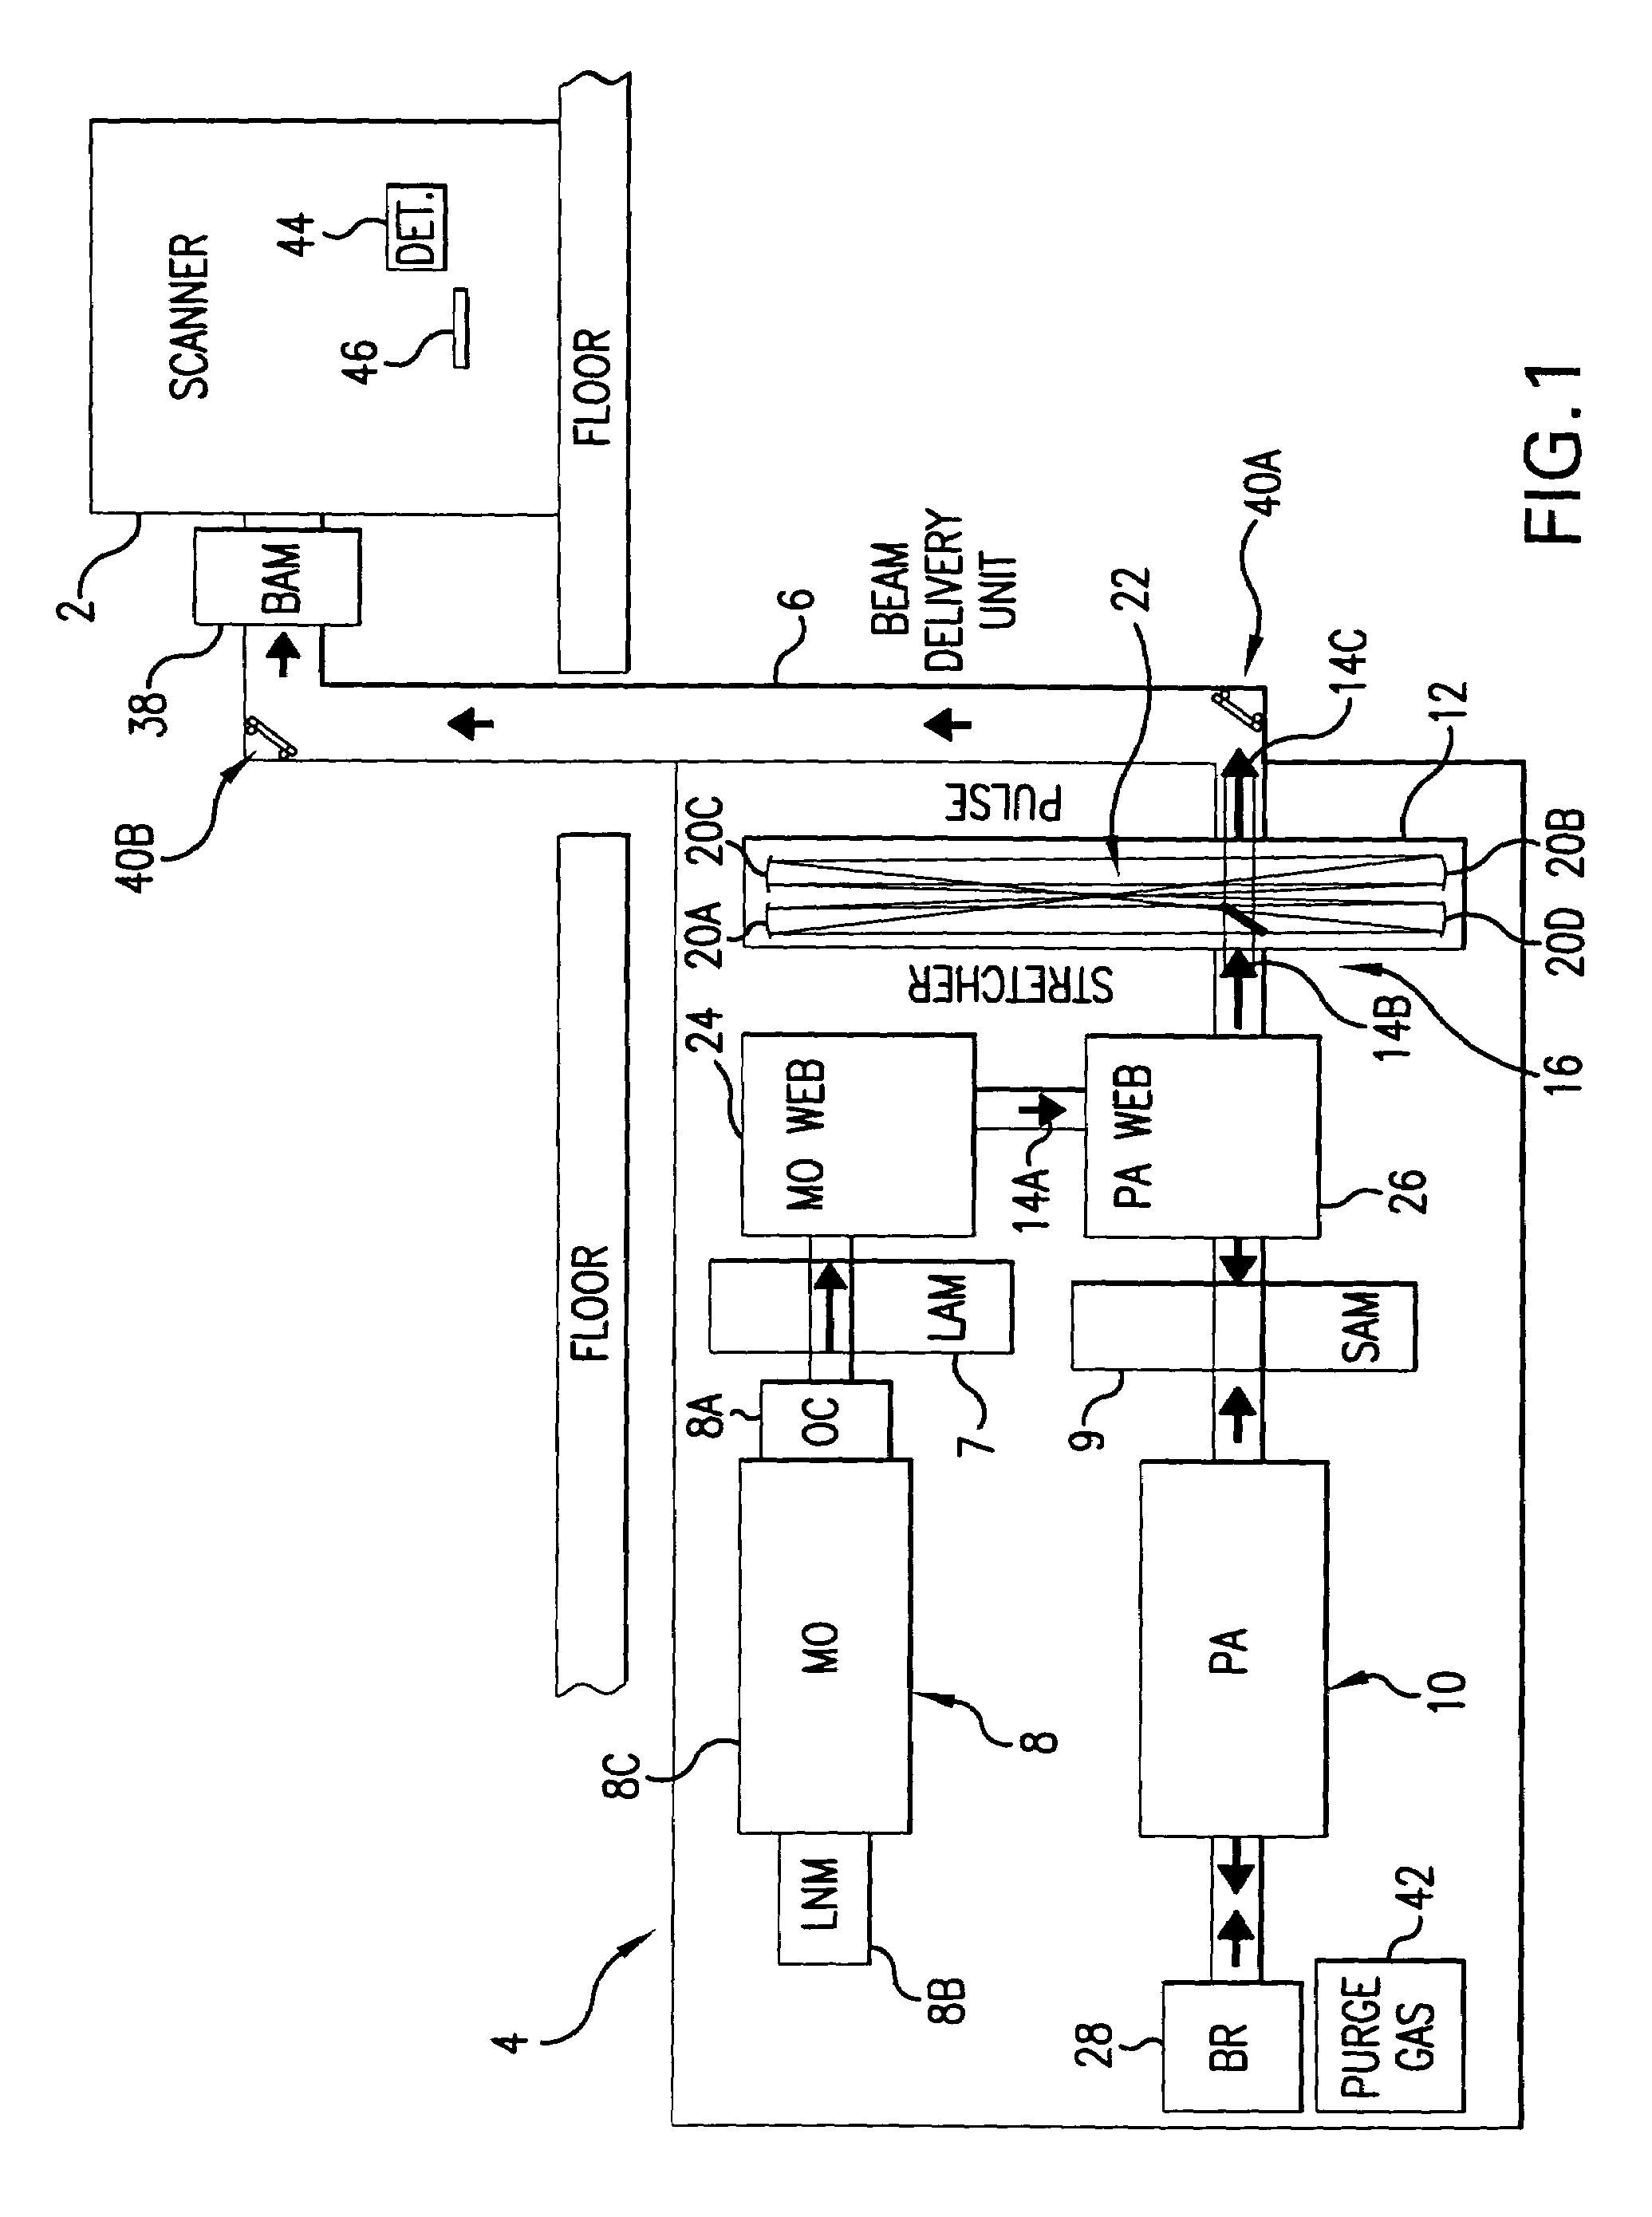 Lithography laser with beam delivery and beam pointing control